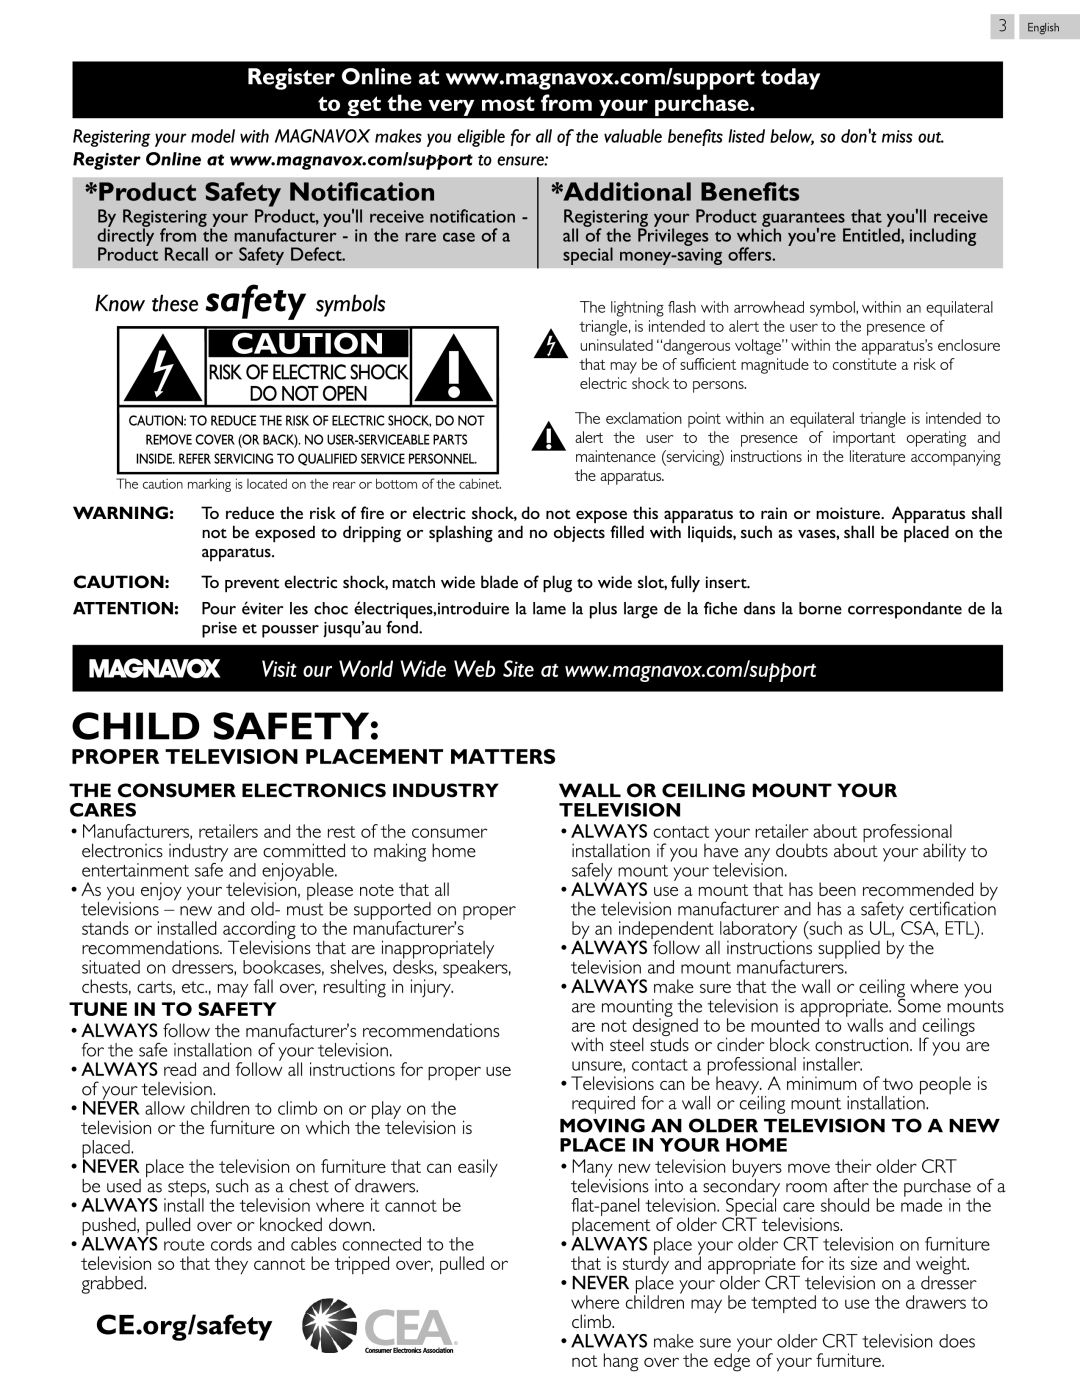 Magnavox 46ME313V/F7 A, 50ME313V/F7 A Product Safety Notification, Additional Benefits, Know these safety symbols 